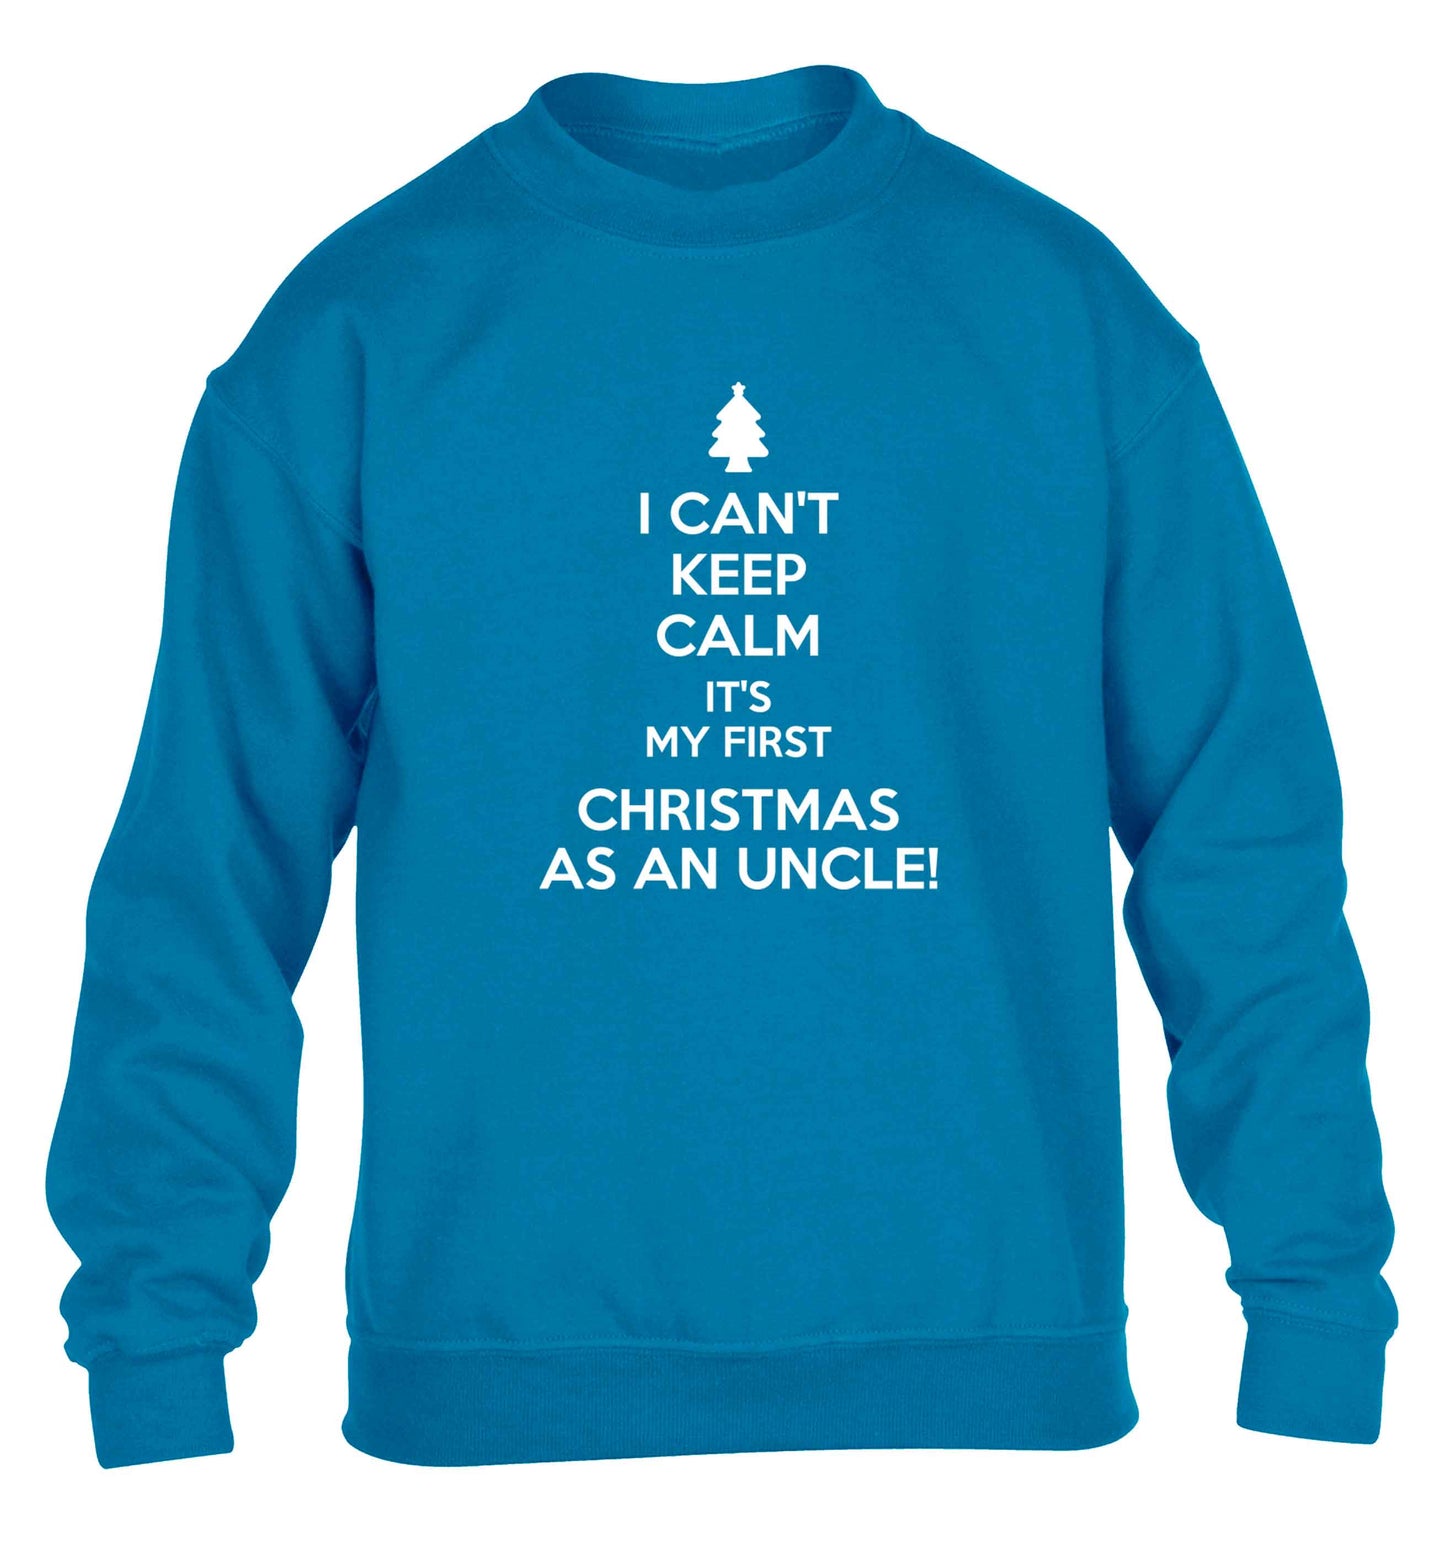 I can't keep calm it's my first Christmas as an uncle! children's blue sweater 12-13 Years